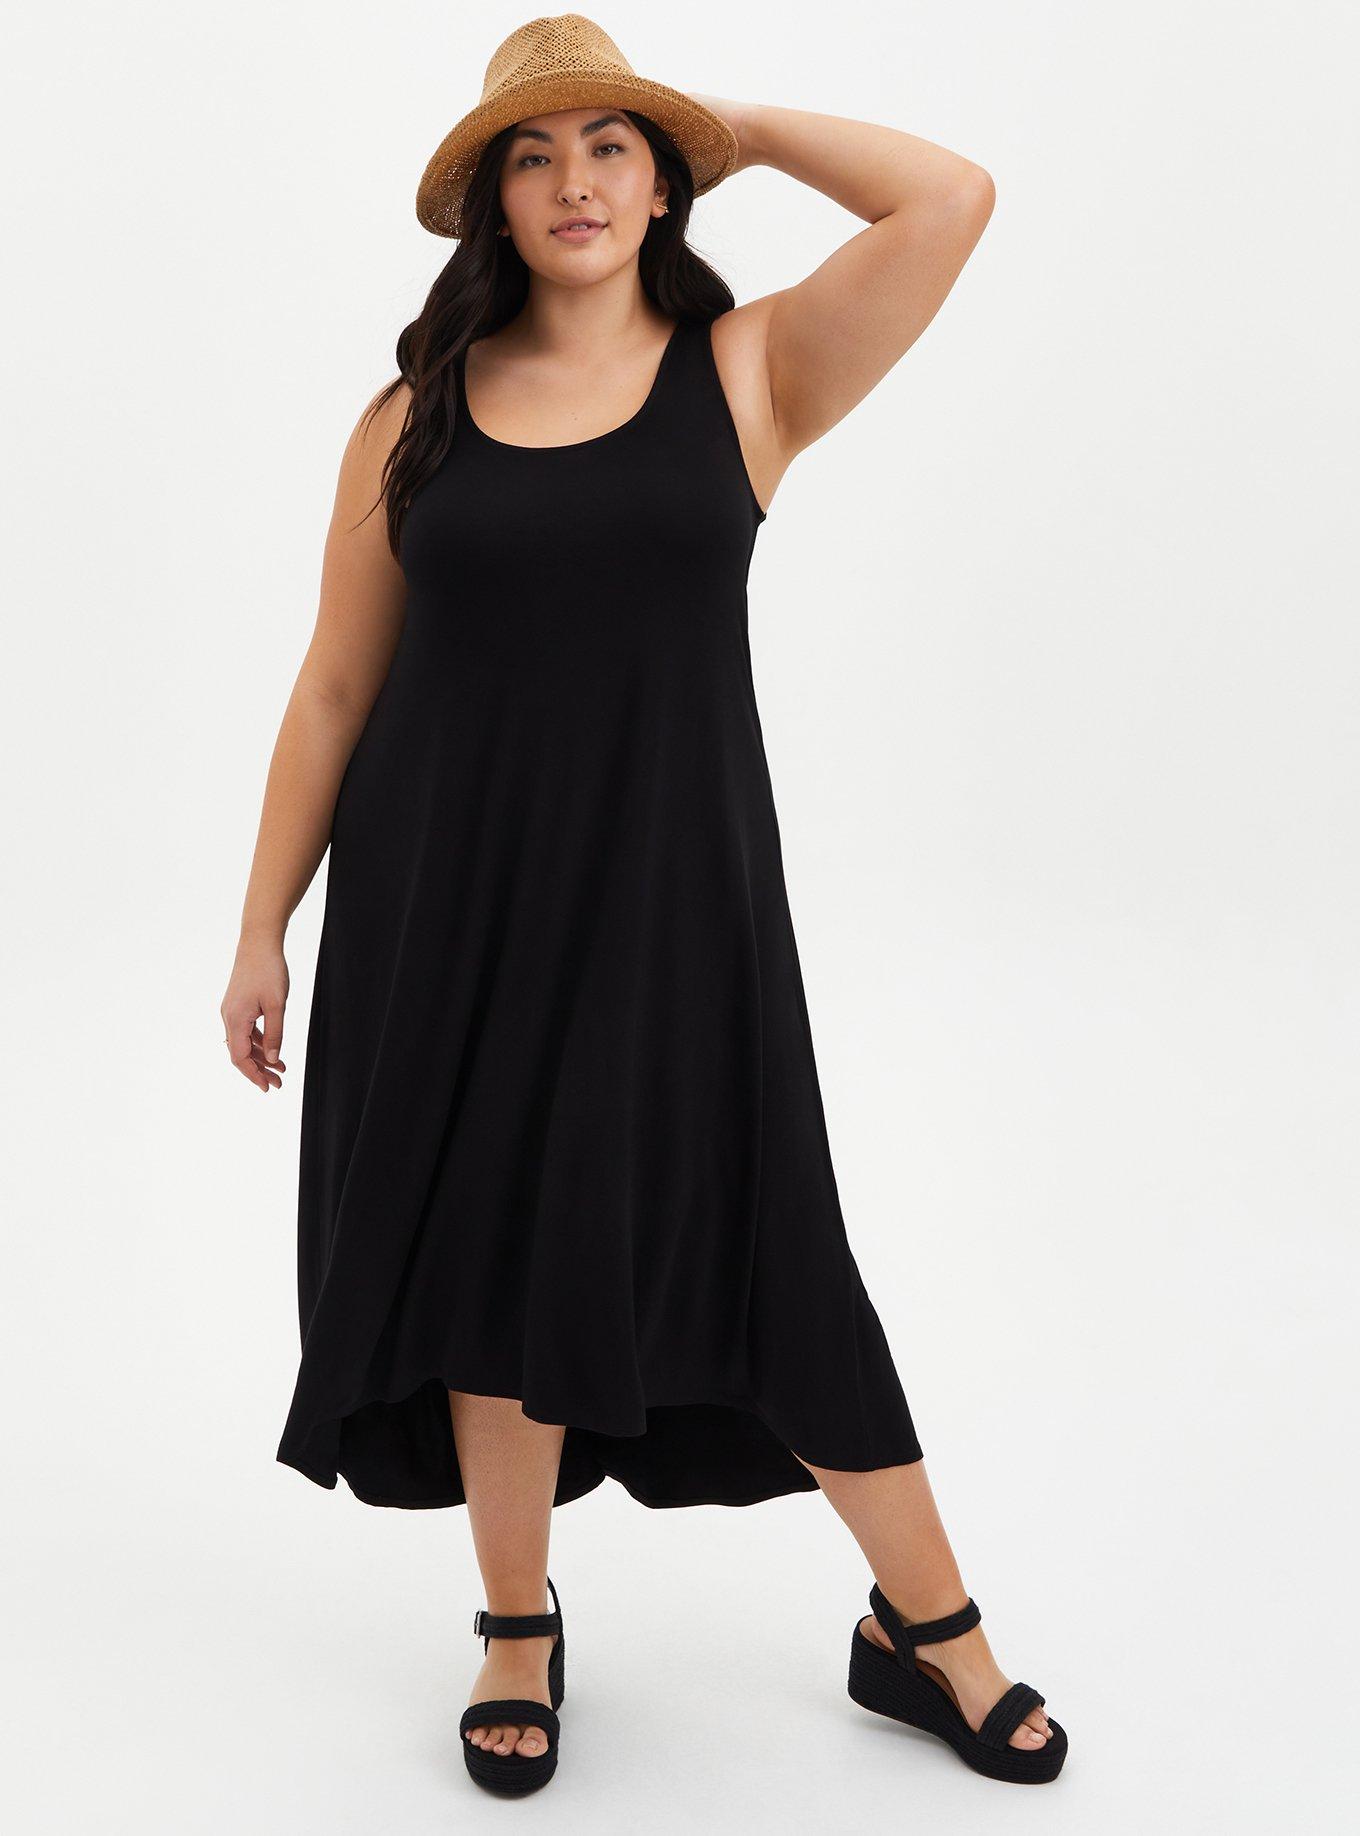 Torrid Plus Size Women's Clothing for sale in Coon Rapids, Minnesota